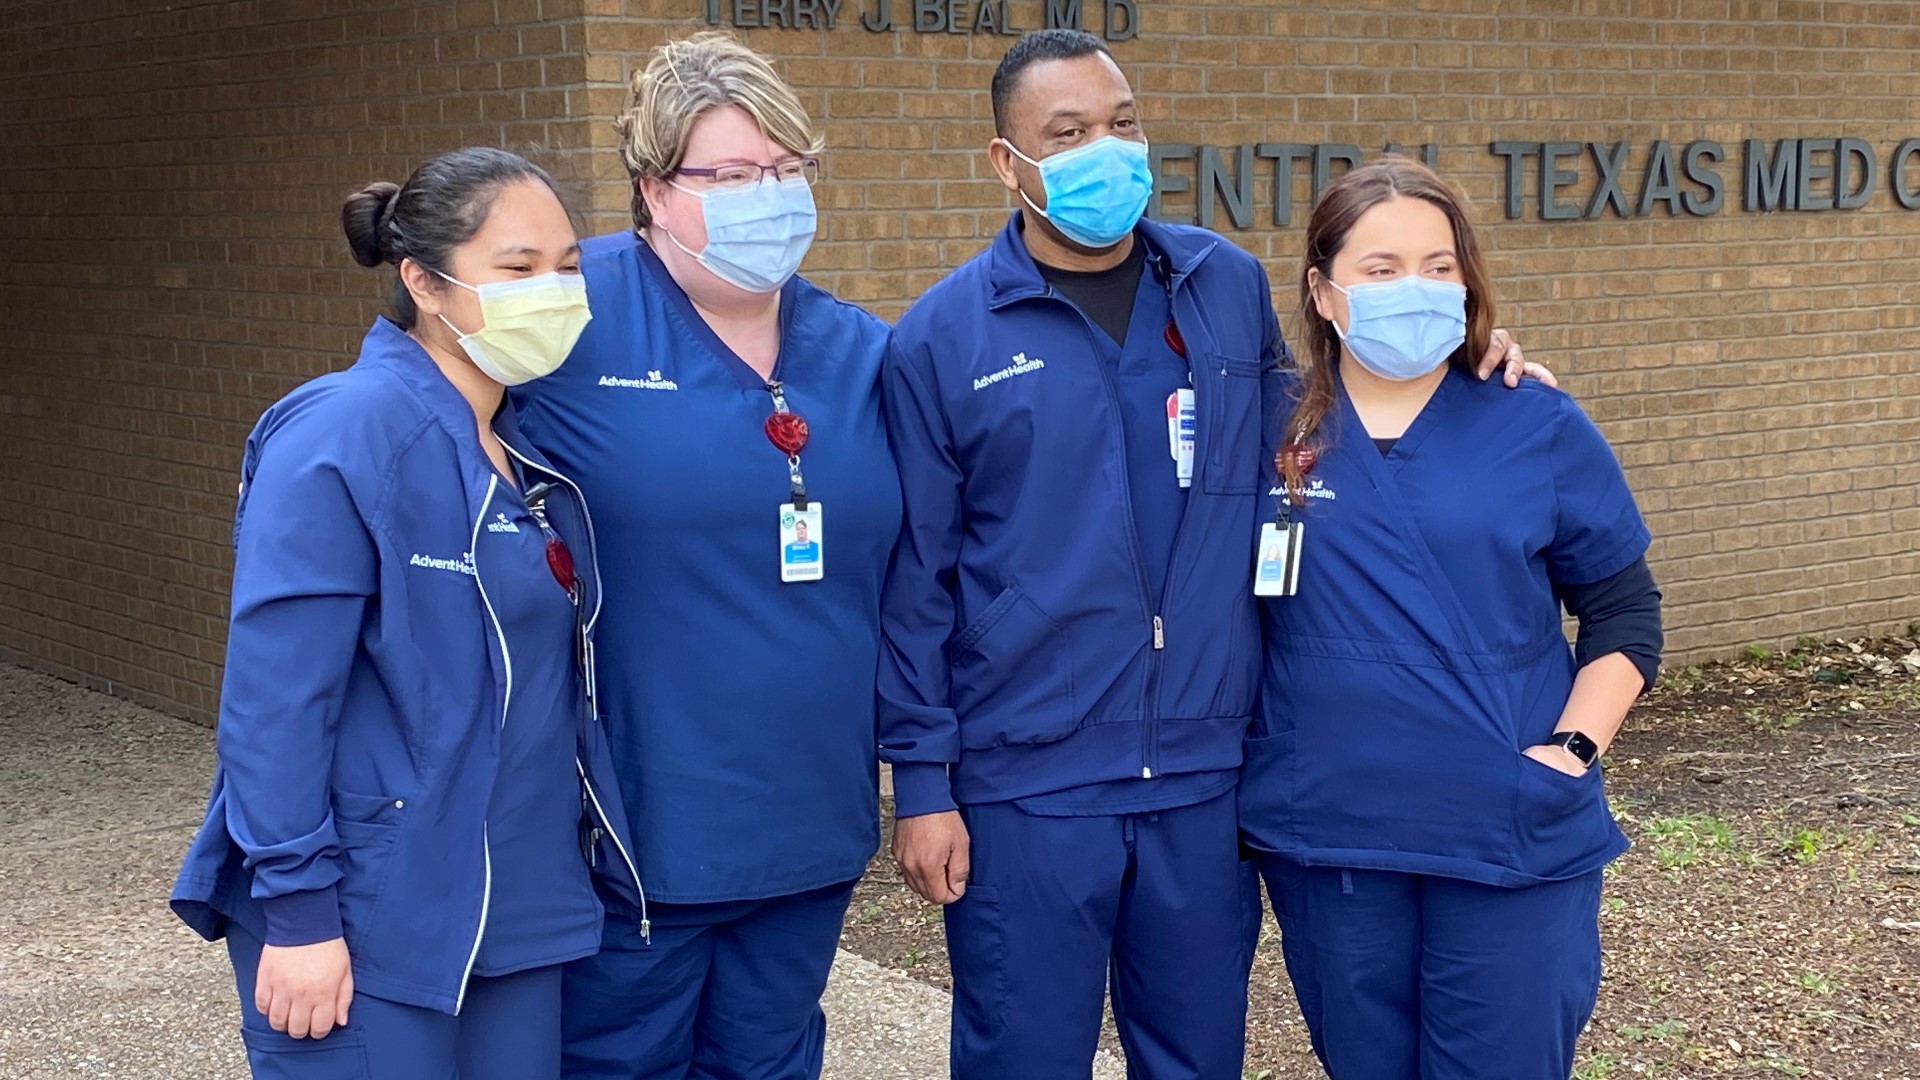 For these four Killeen nurses, their residencies took a weird turn when the pandemic reached Central Texas. They adjusted, persevered and now they're officially done